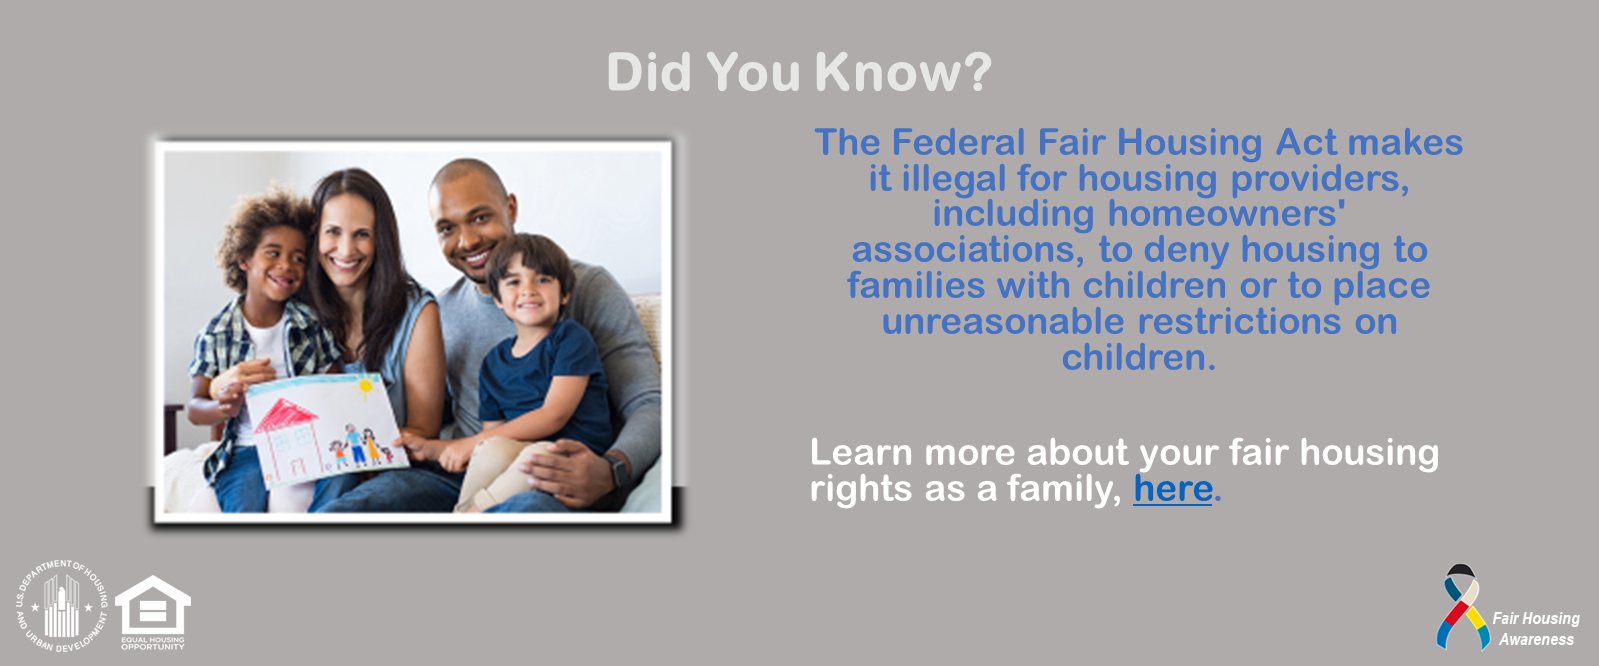 [The Federal Fair Housing Act makes it illegal for housing providers, including homeowners' associations, to deny housing to families with children or to place unreasonable restrictions on children.]. HUD photo